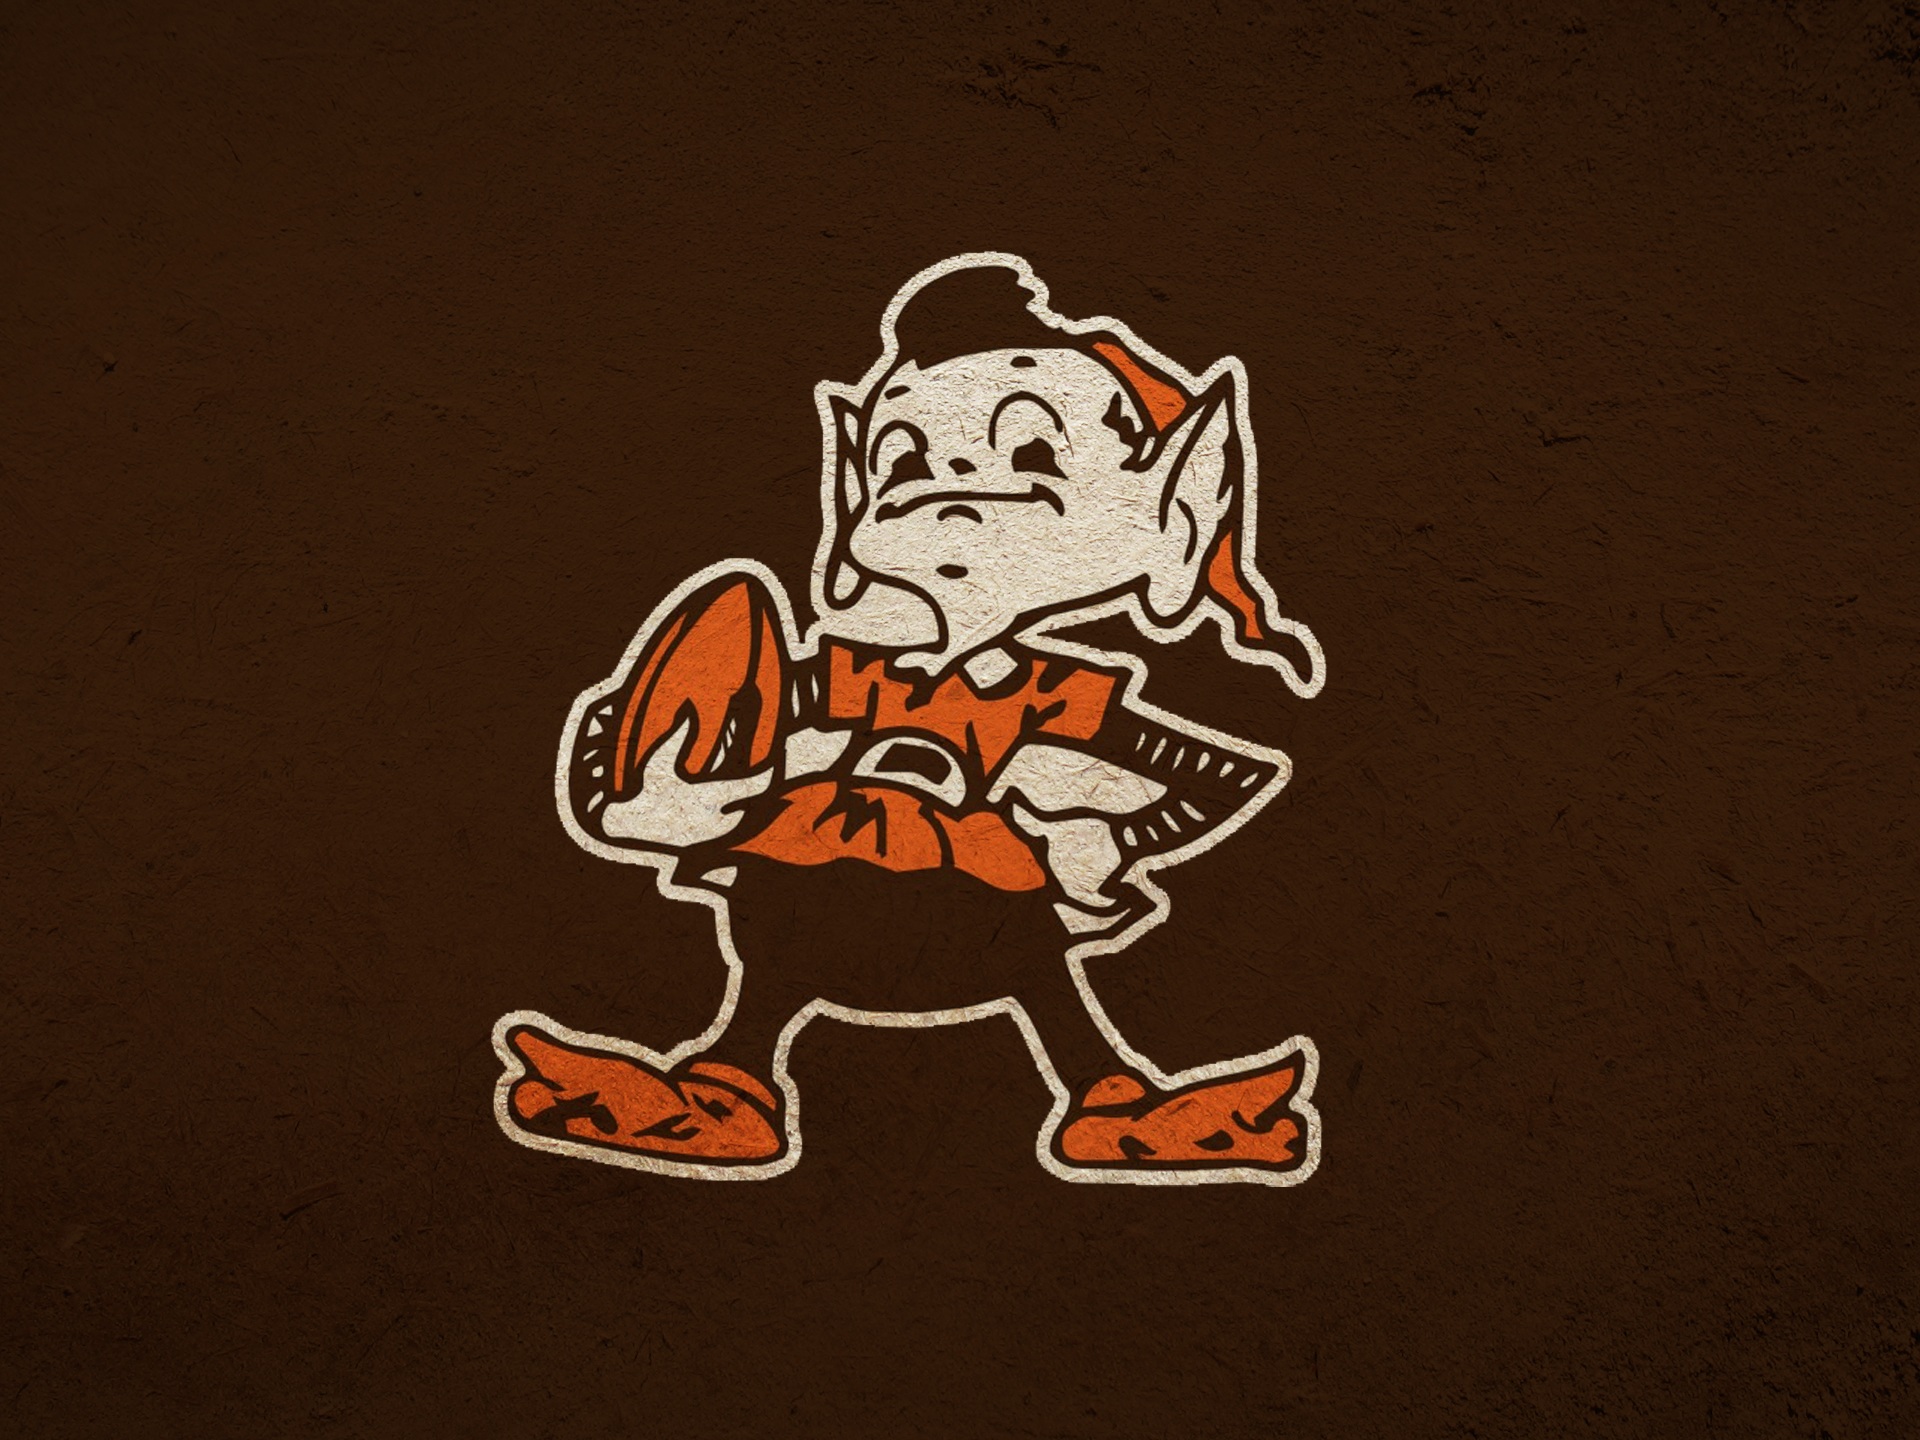 Cleveland Browns Iphone Wallpapers